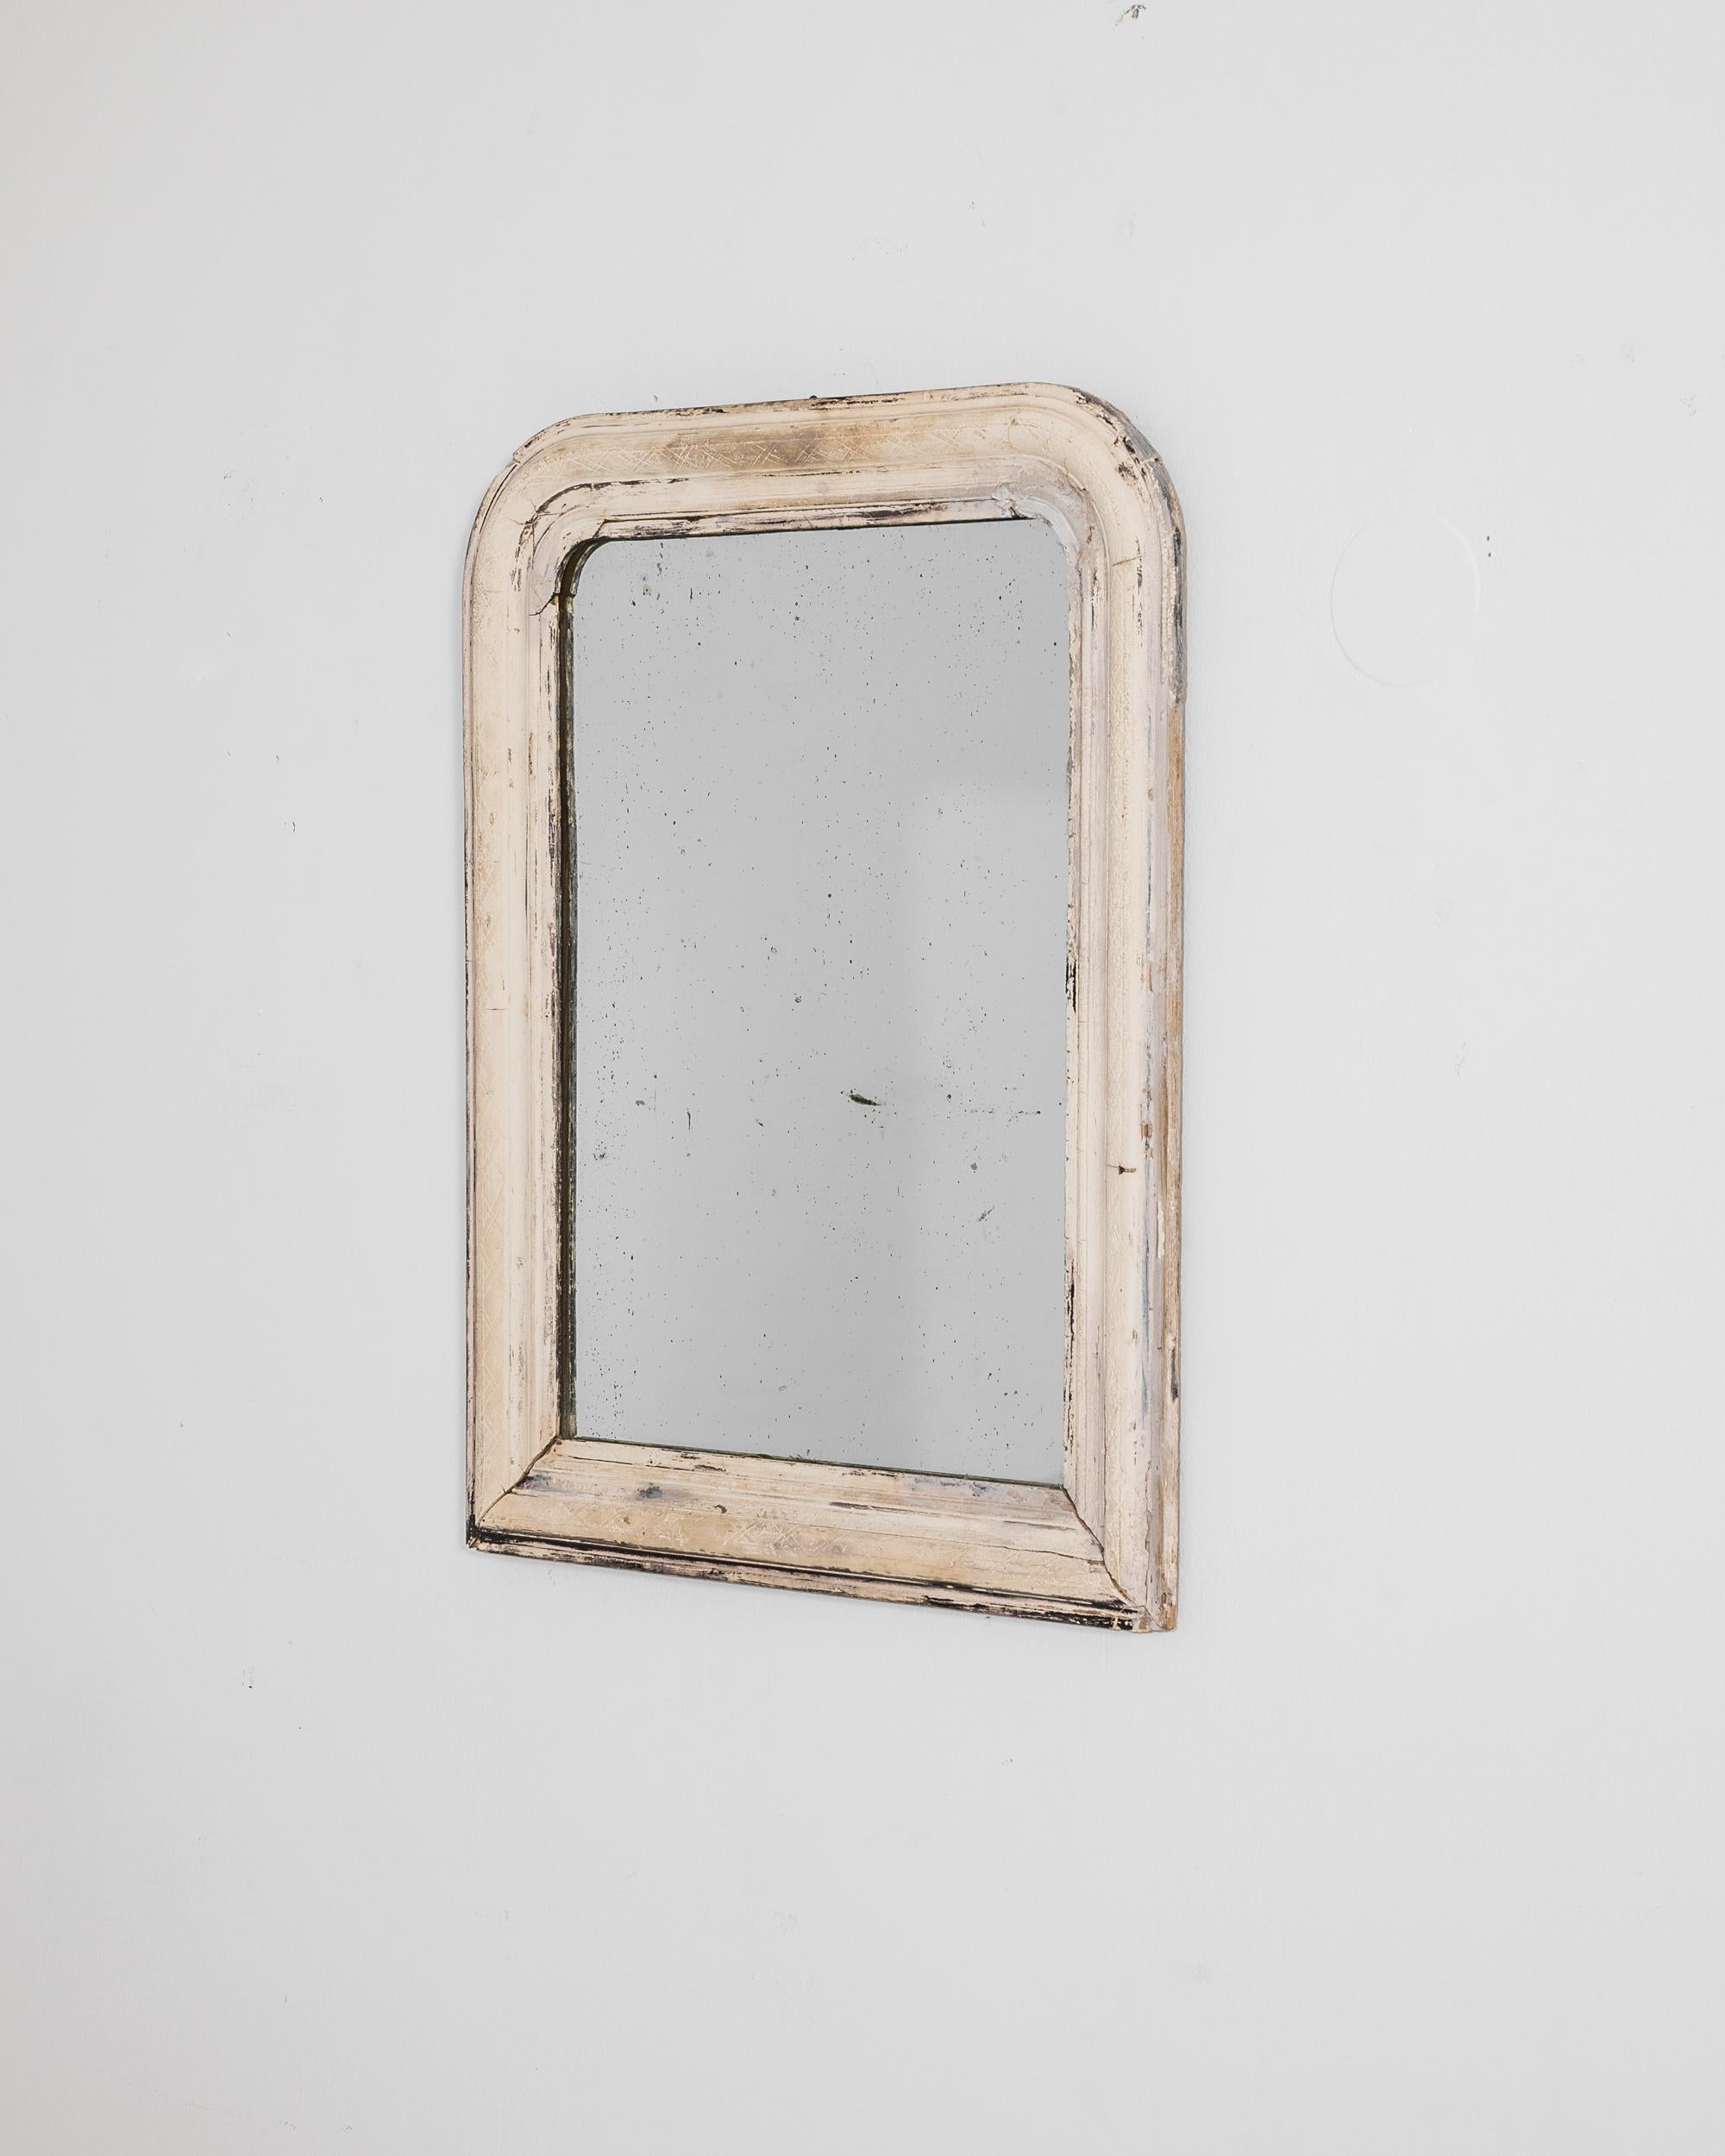 A timeworn piece with a youthful charm, this antique wooden mirror makes an enchanting addition to a bedroom or boudoir. Made in France circa 1880, rounded corners create a soft frame for the face; a delicate design of woven ribbons evoke the